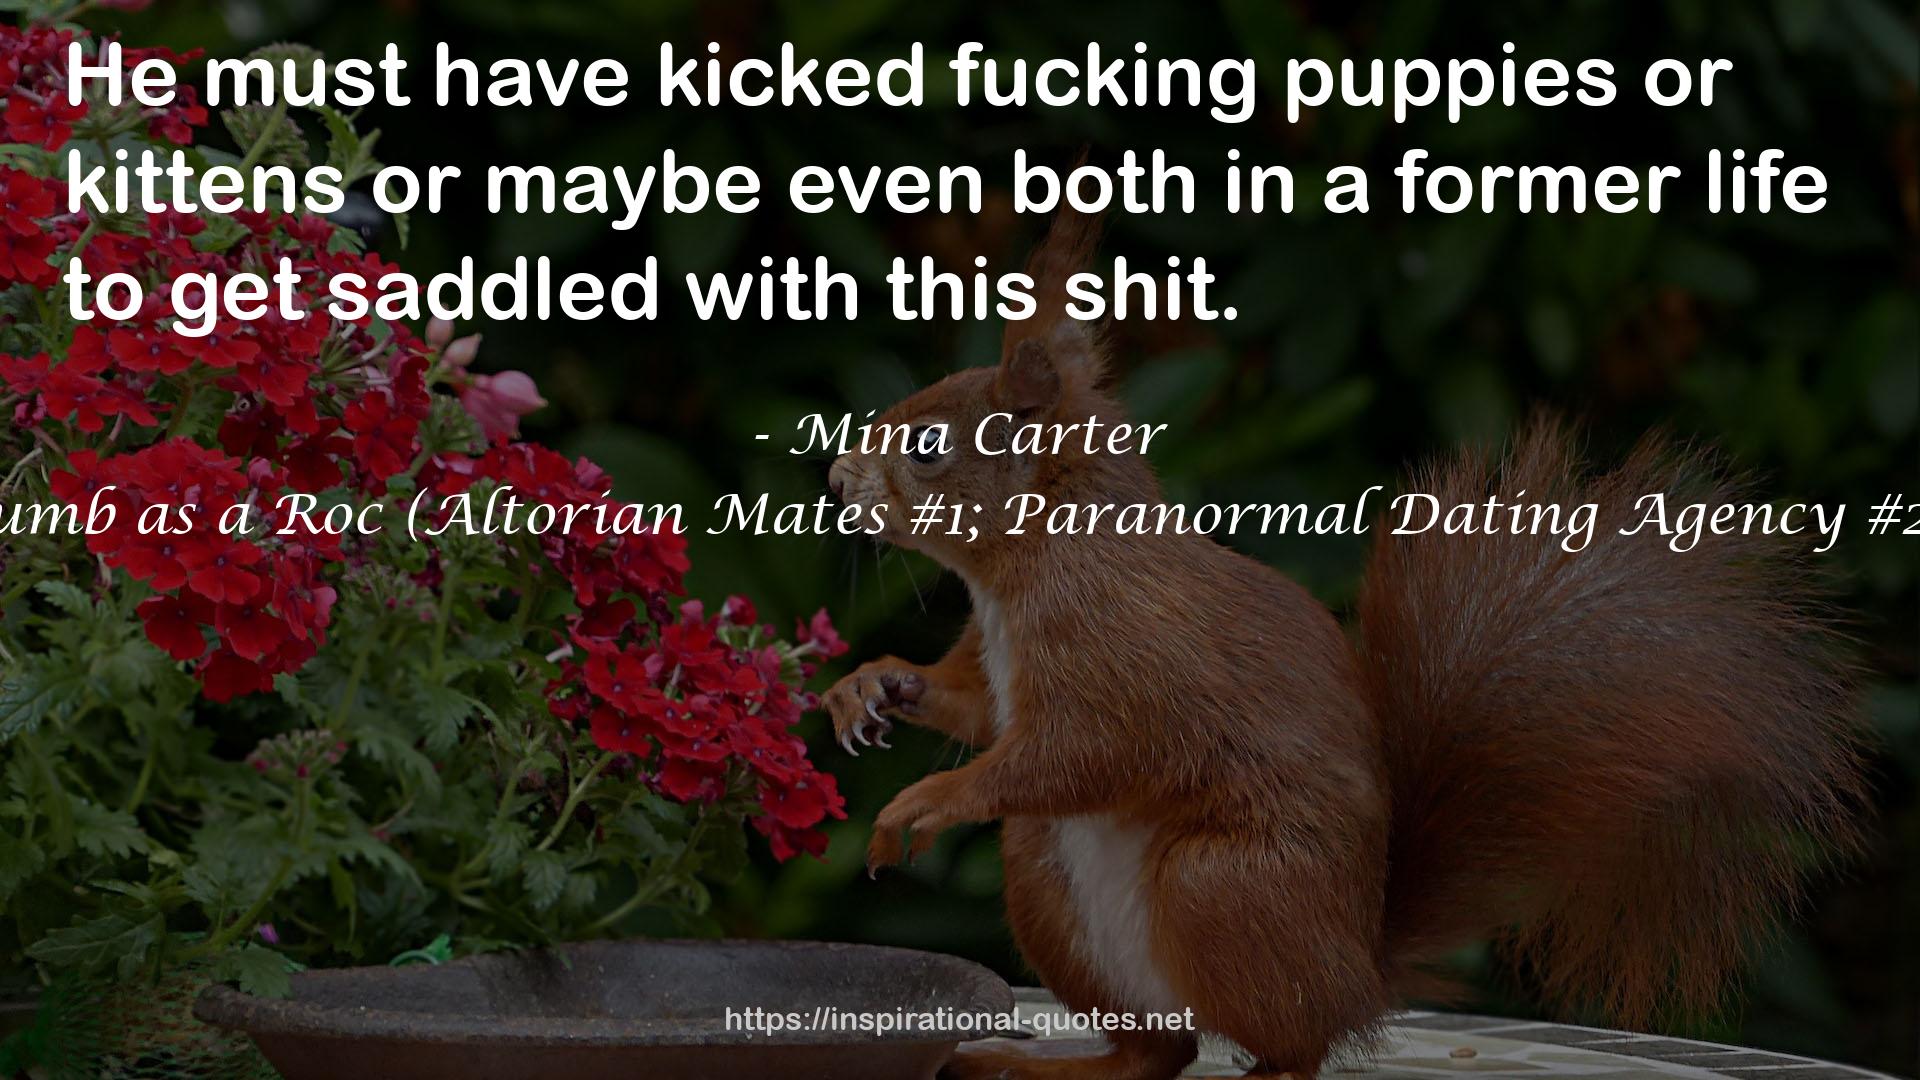 Dumb as a Roc (Altorian Mates #1; Paranormal Dating Agency #20) QUOTES